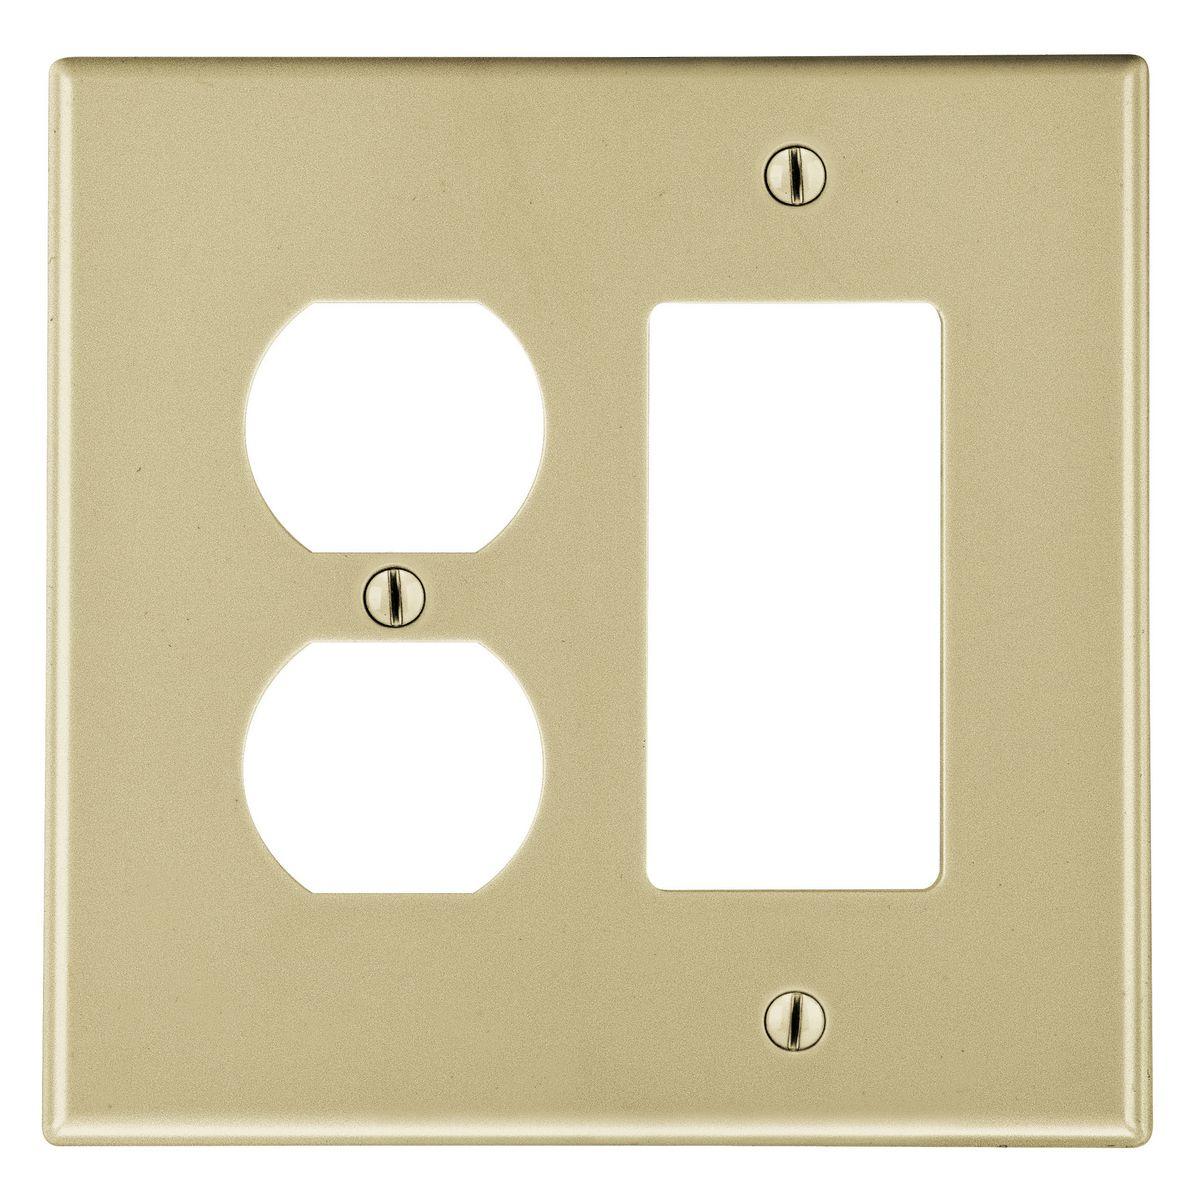 Hubbell PJ826I Wallplate, Mid-Size 2-Gang, 1) Duplex 1) Decorator, Ivory  ; High-impact, self-extinguishing polycarbonate material ; More Rigid ; Sharp lines and less dimpling ; Smooth satin finish ; Blends into wall with an optimum finish ; Smooth Satin Finish